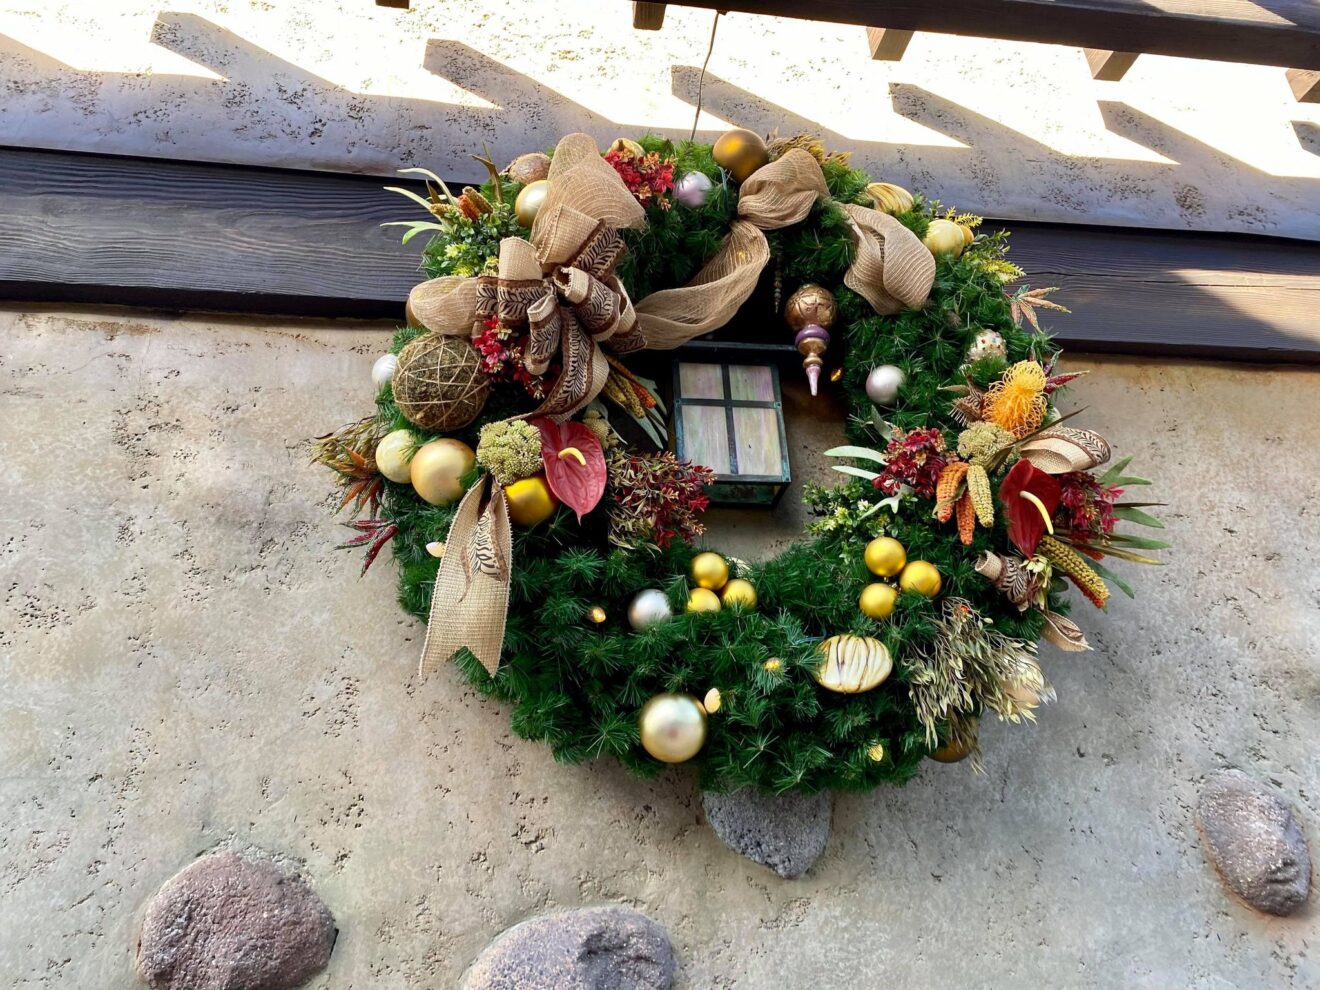 Disney's Animal Kingdom decorated for the Holidays | Chip and Company